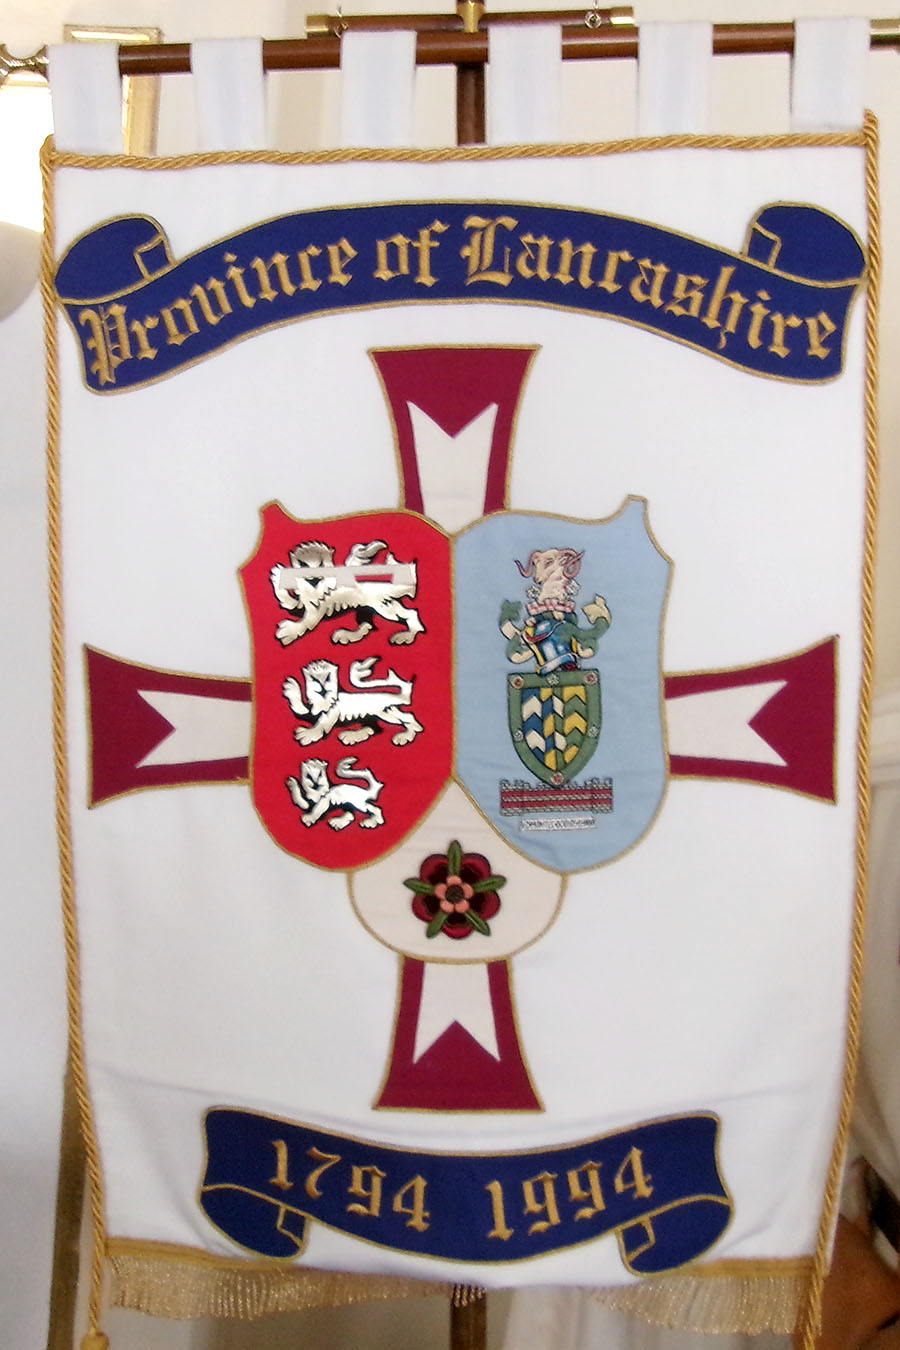 The Provincial Priory of Lancashire